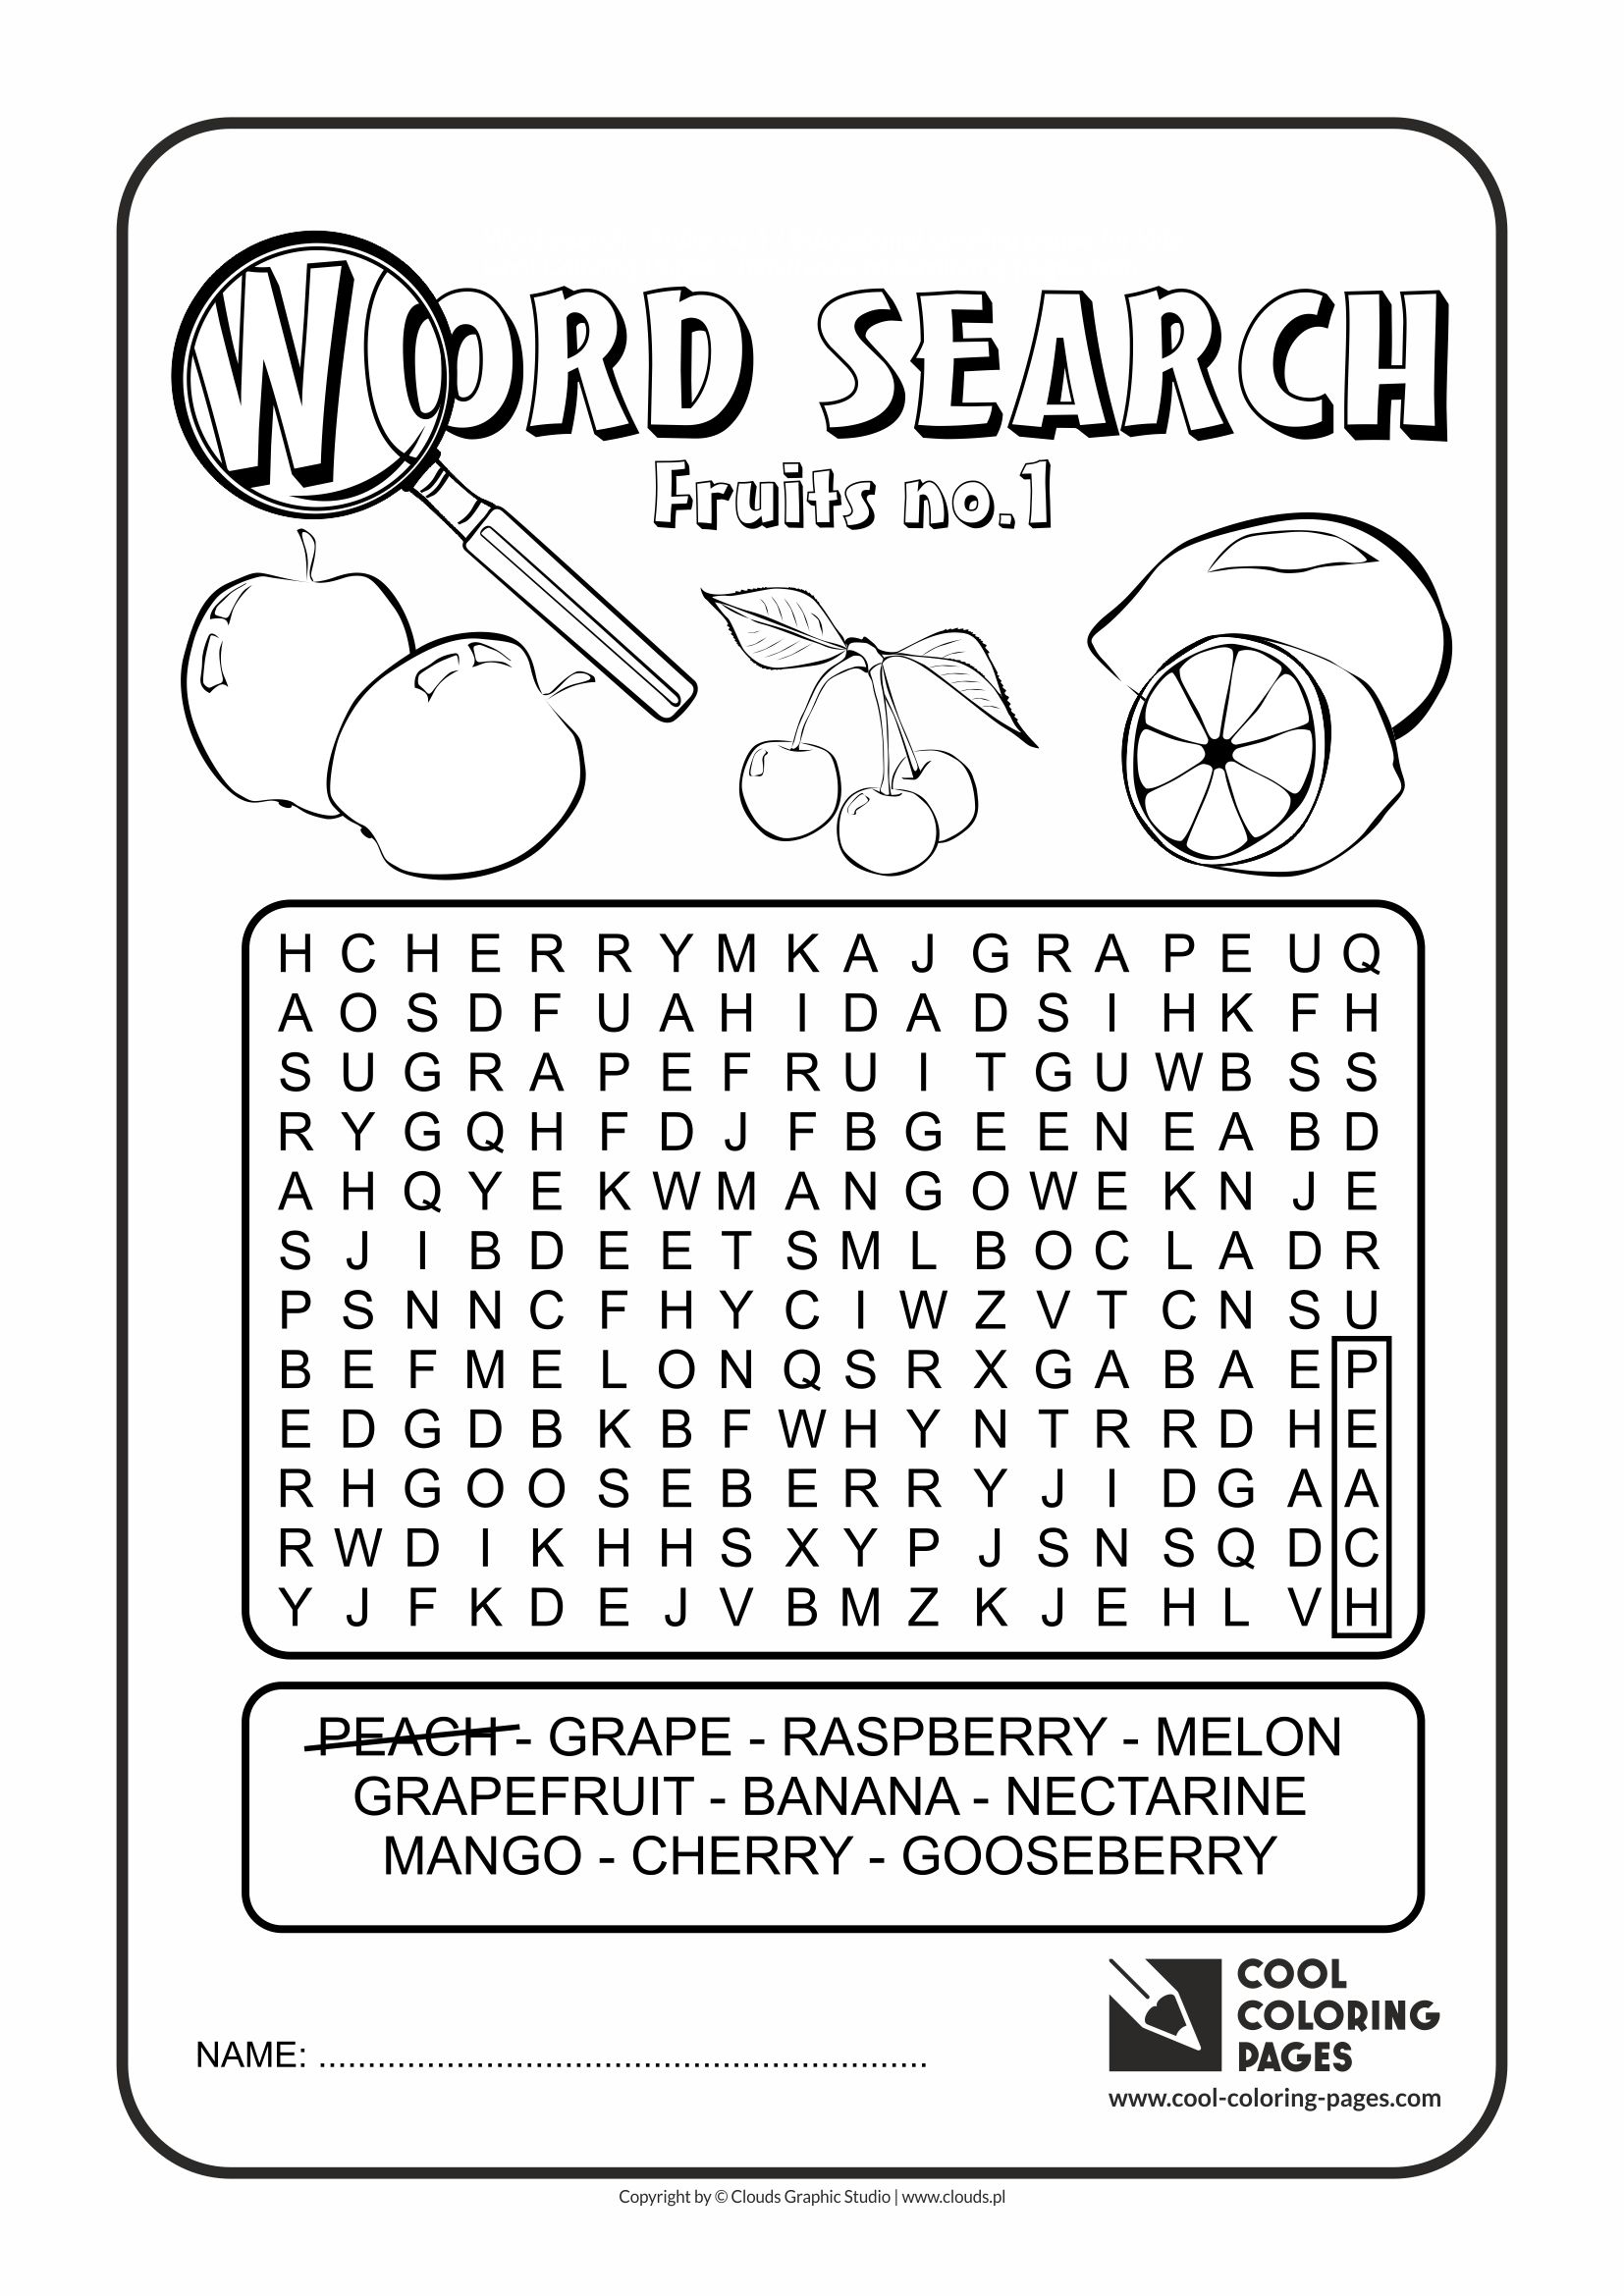 Cool Coloring Pages Word Search - Cool Coloring Pages | Free